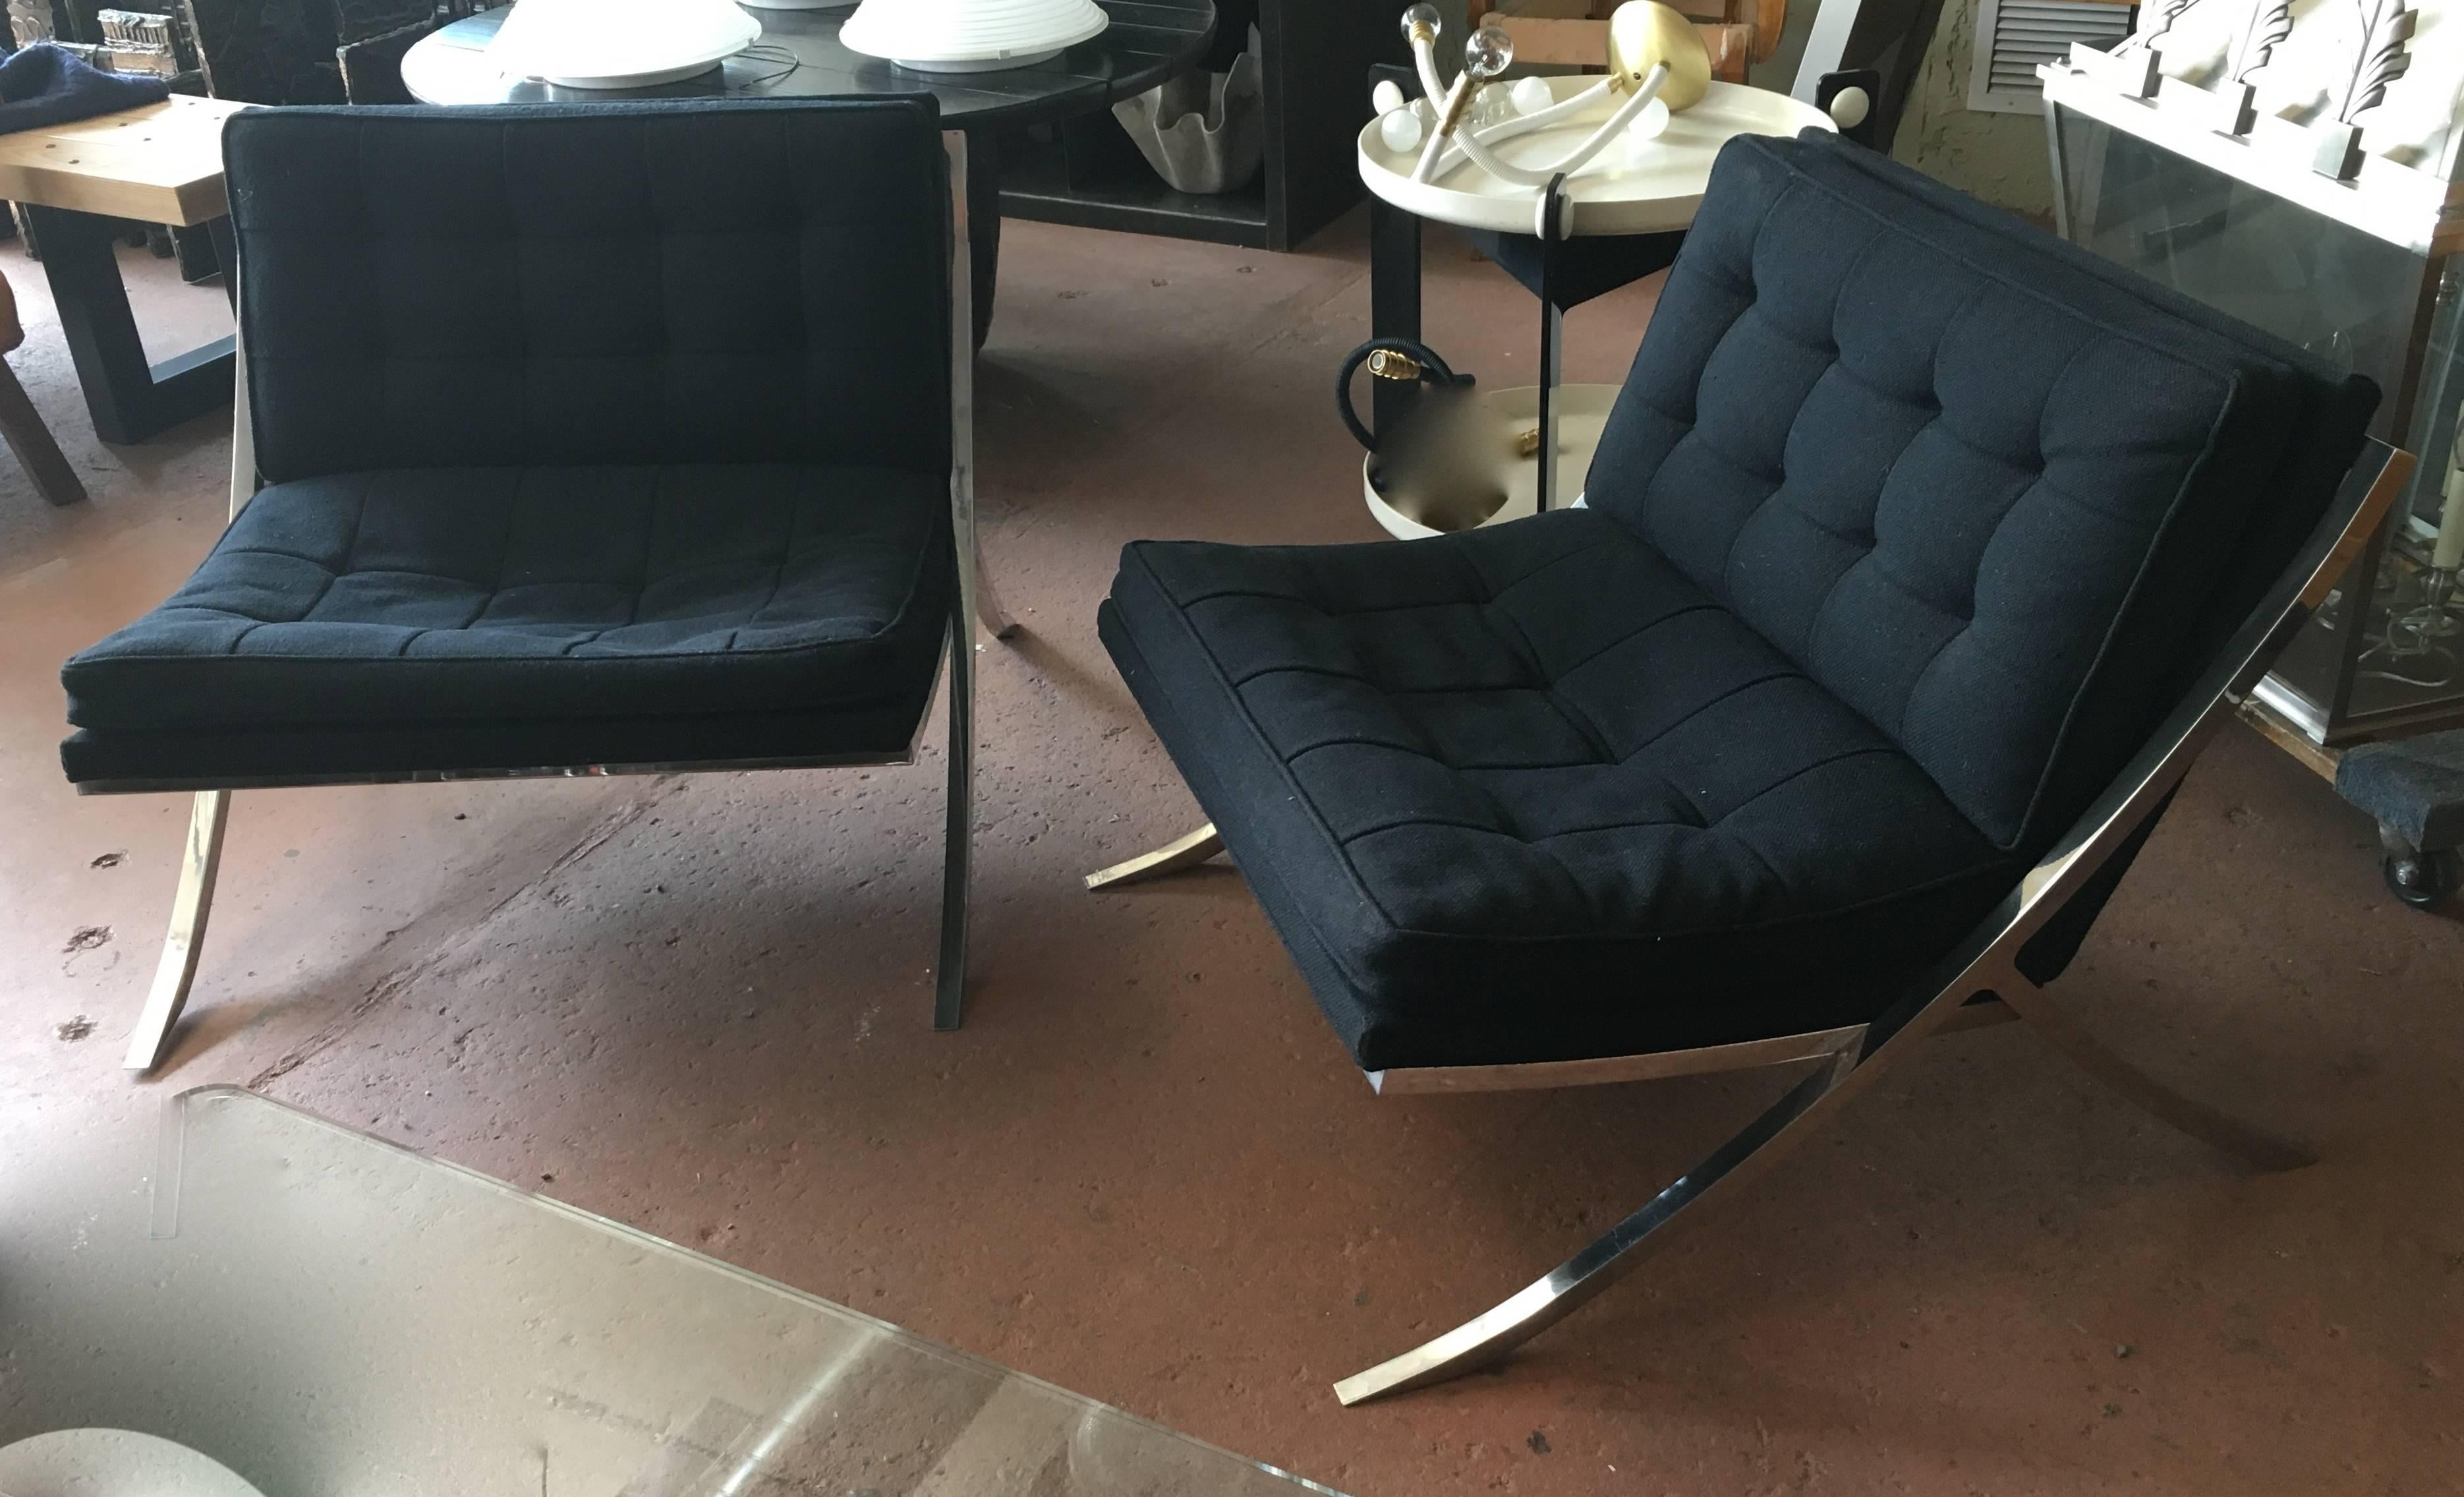 Pair of 1970s polished solid stainless steel lounge chairs with original label Mueller Furniture Co, substantial and heavy. Original black linen upholstery,  reupholstery recommended. Nice alternative to a Barcelona chair.

Avantgarden Ltd.